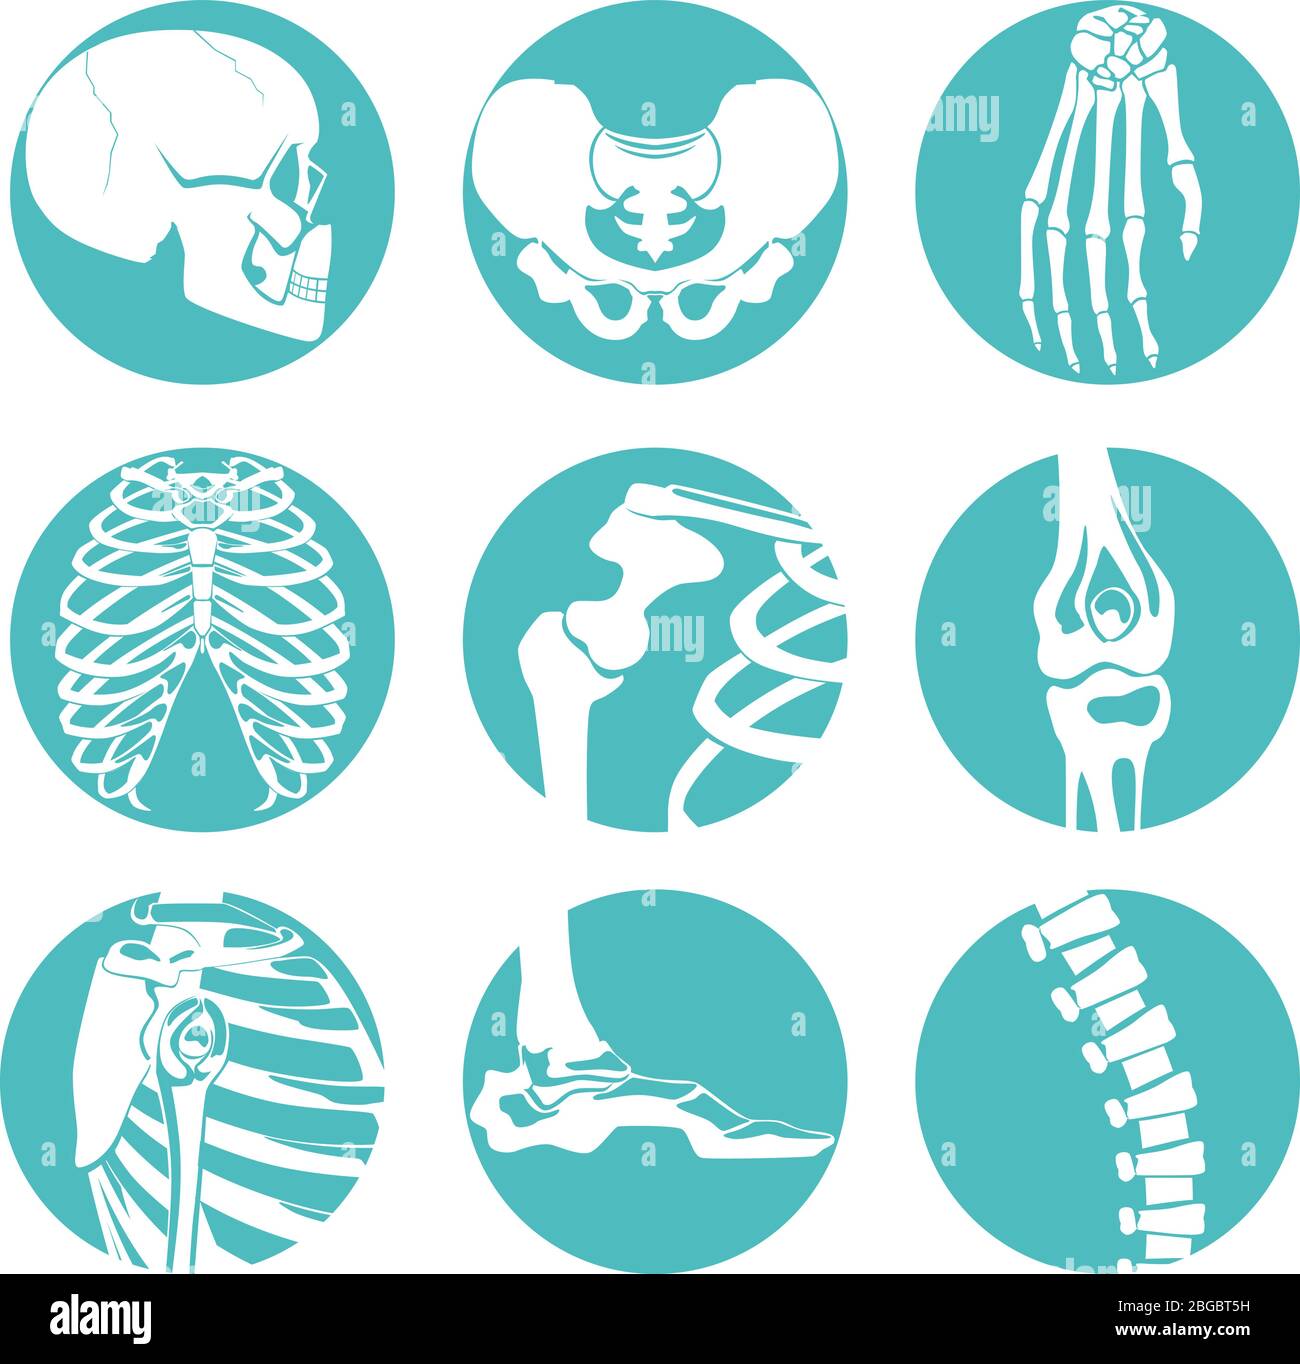 Illustrations of human anatomy. Orthopedic pictures of skeleton and different bones Stock Vector